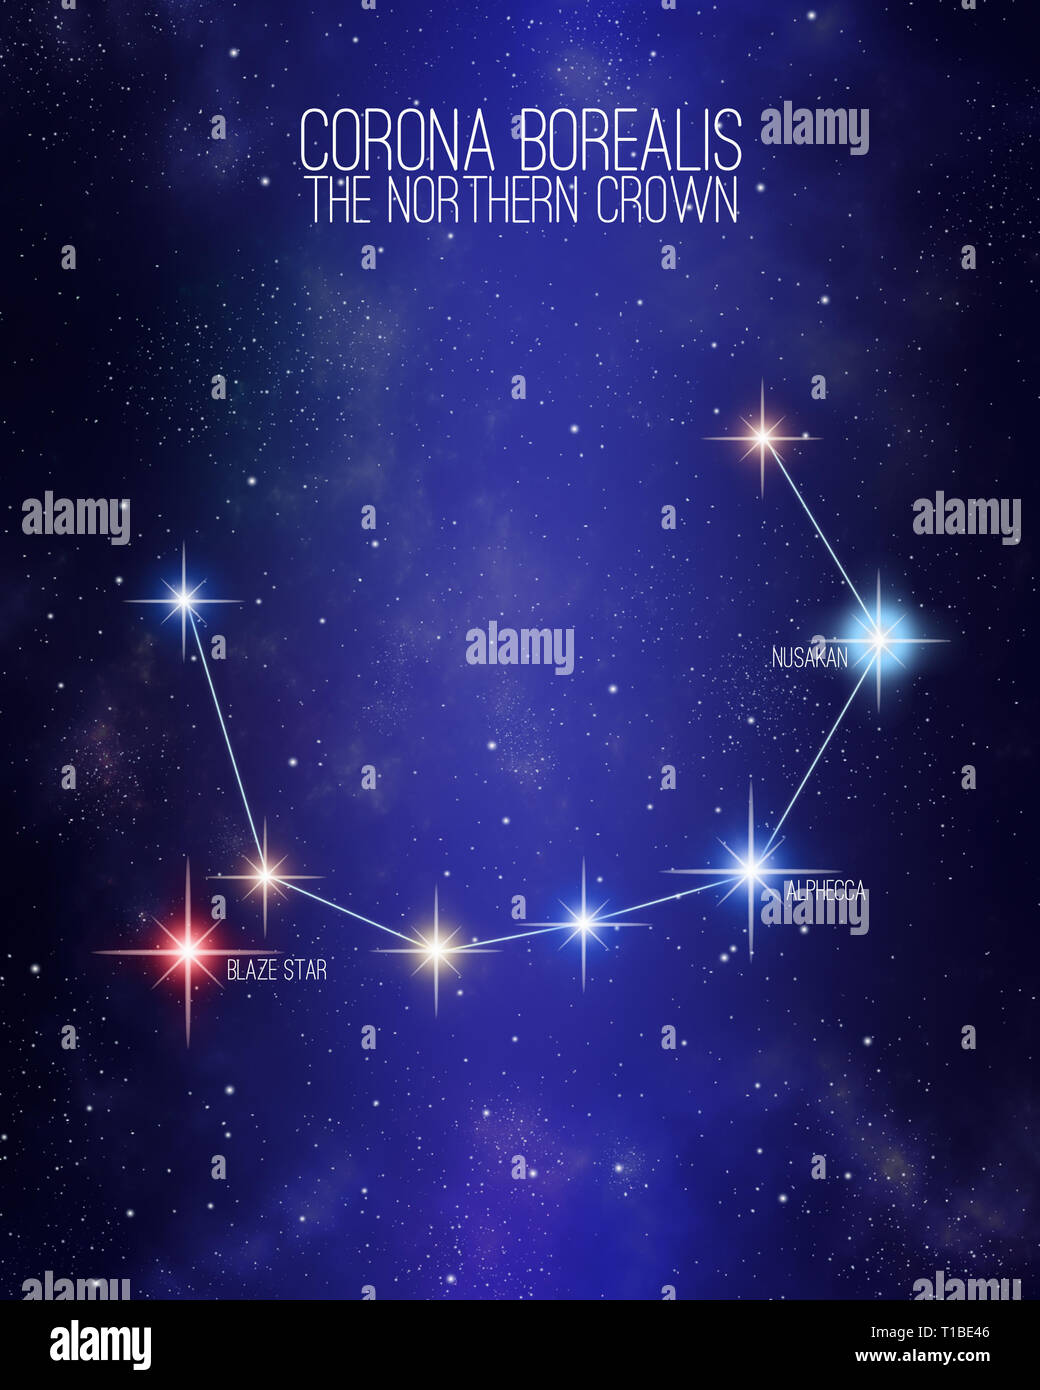 Corona borealis the northern crown constellation on a starry space background with the names of its main stars. Relative sizes and different color sha Stock Photo